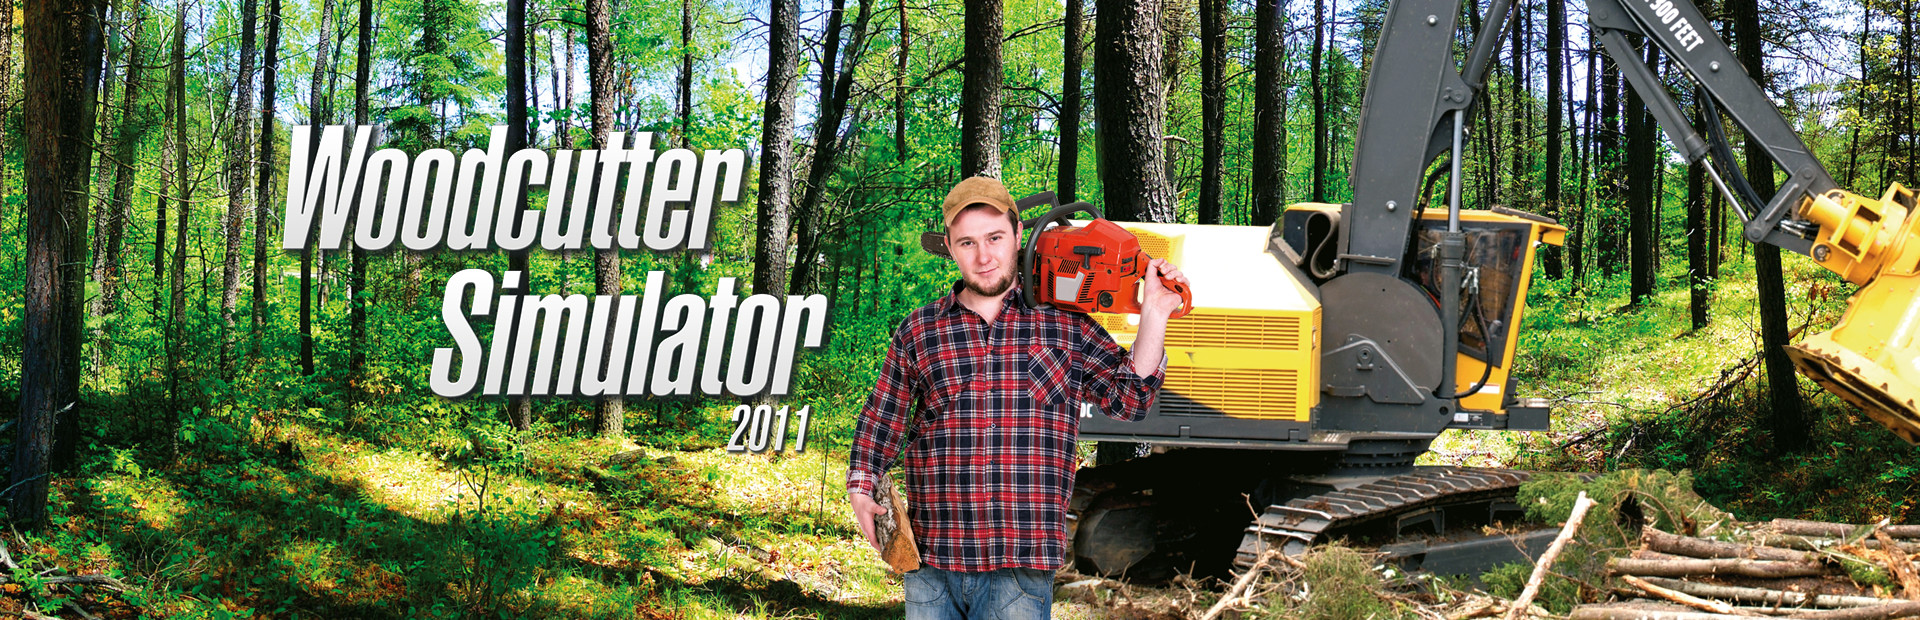 Woodcutter Simulator 2011 cover image